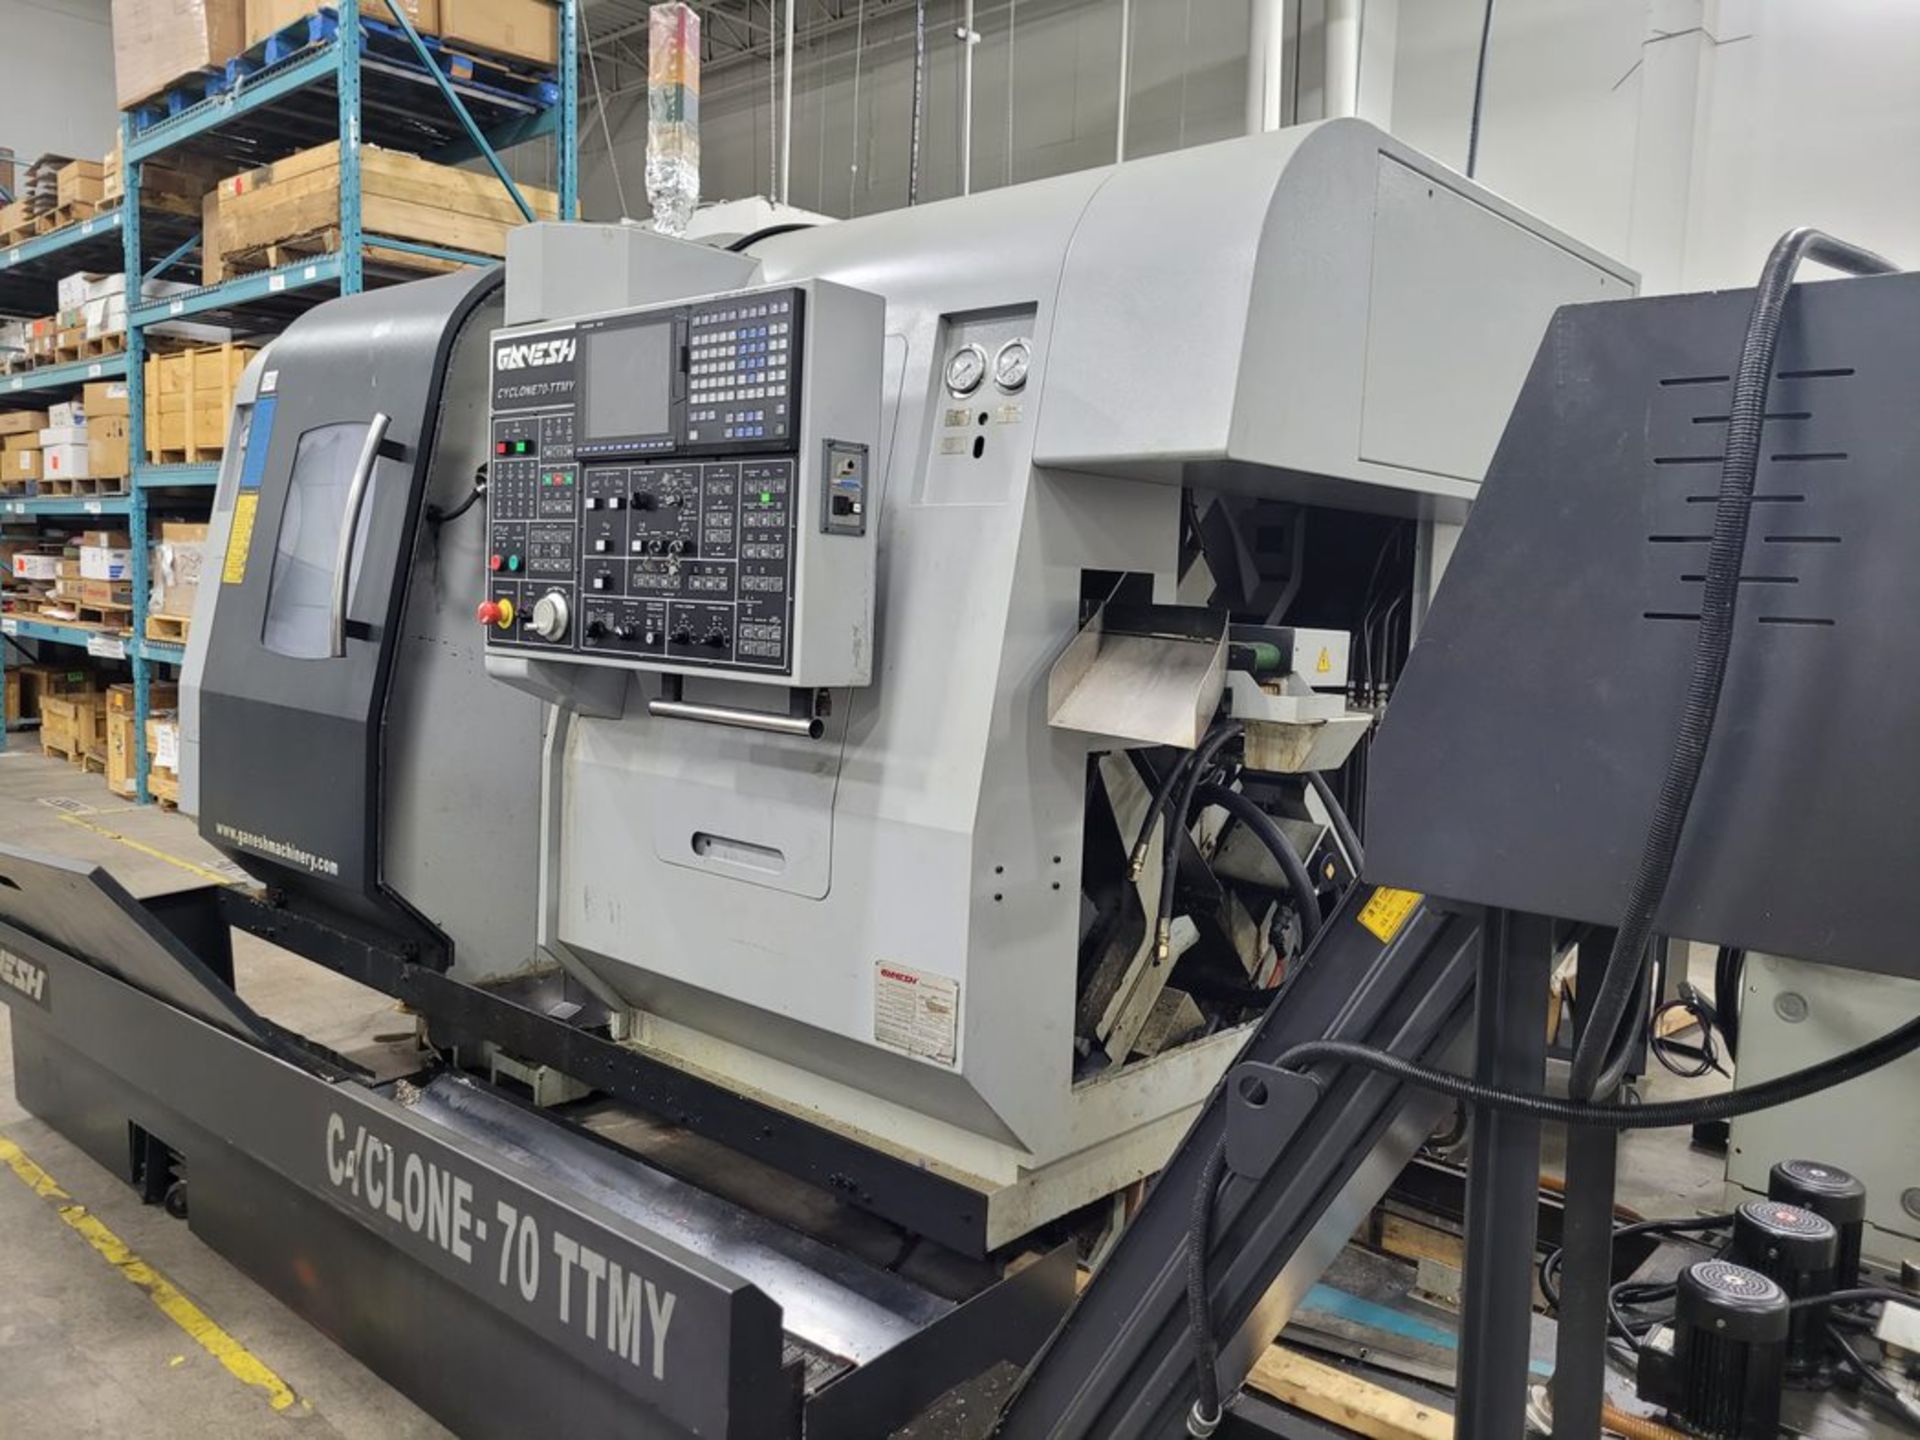 2013 GANESH CYCLONE 70-TTMY CNC Twin Turret Twin Spindle Live Tooling Y-Axis, With Bar Feeder - Image 9 of 28